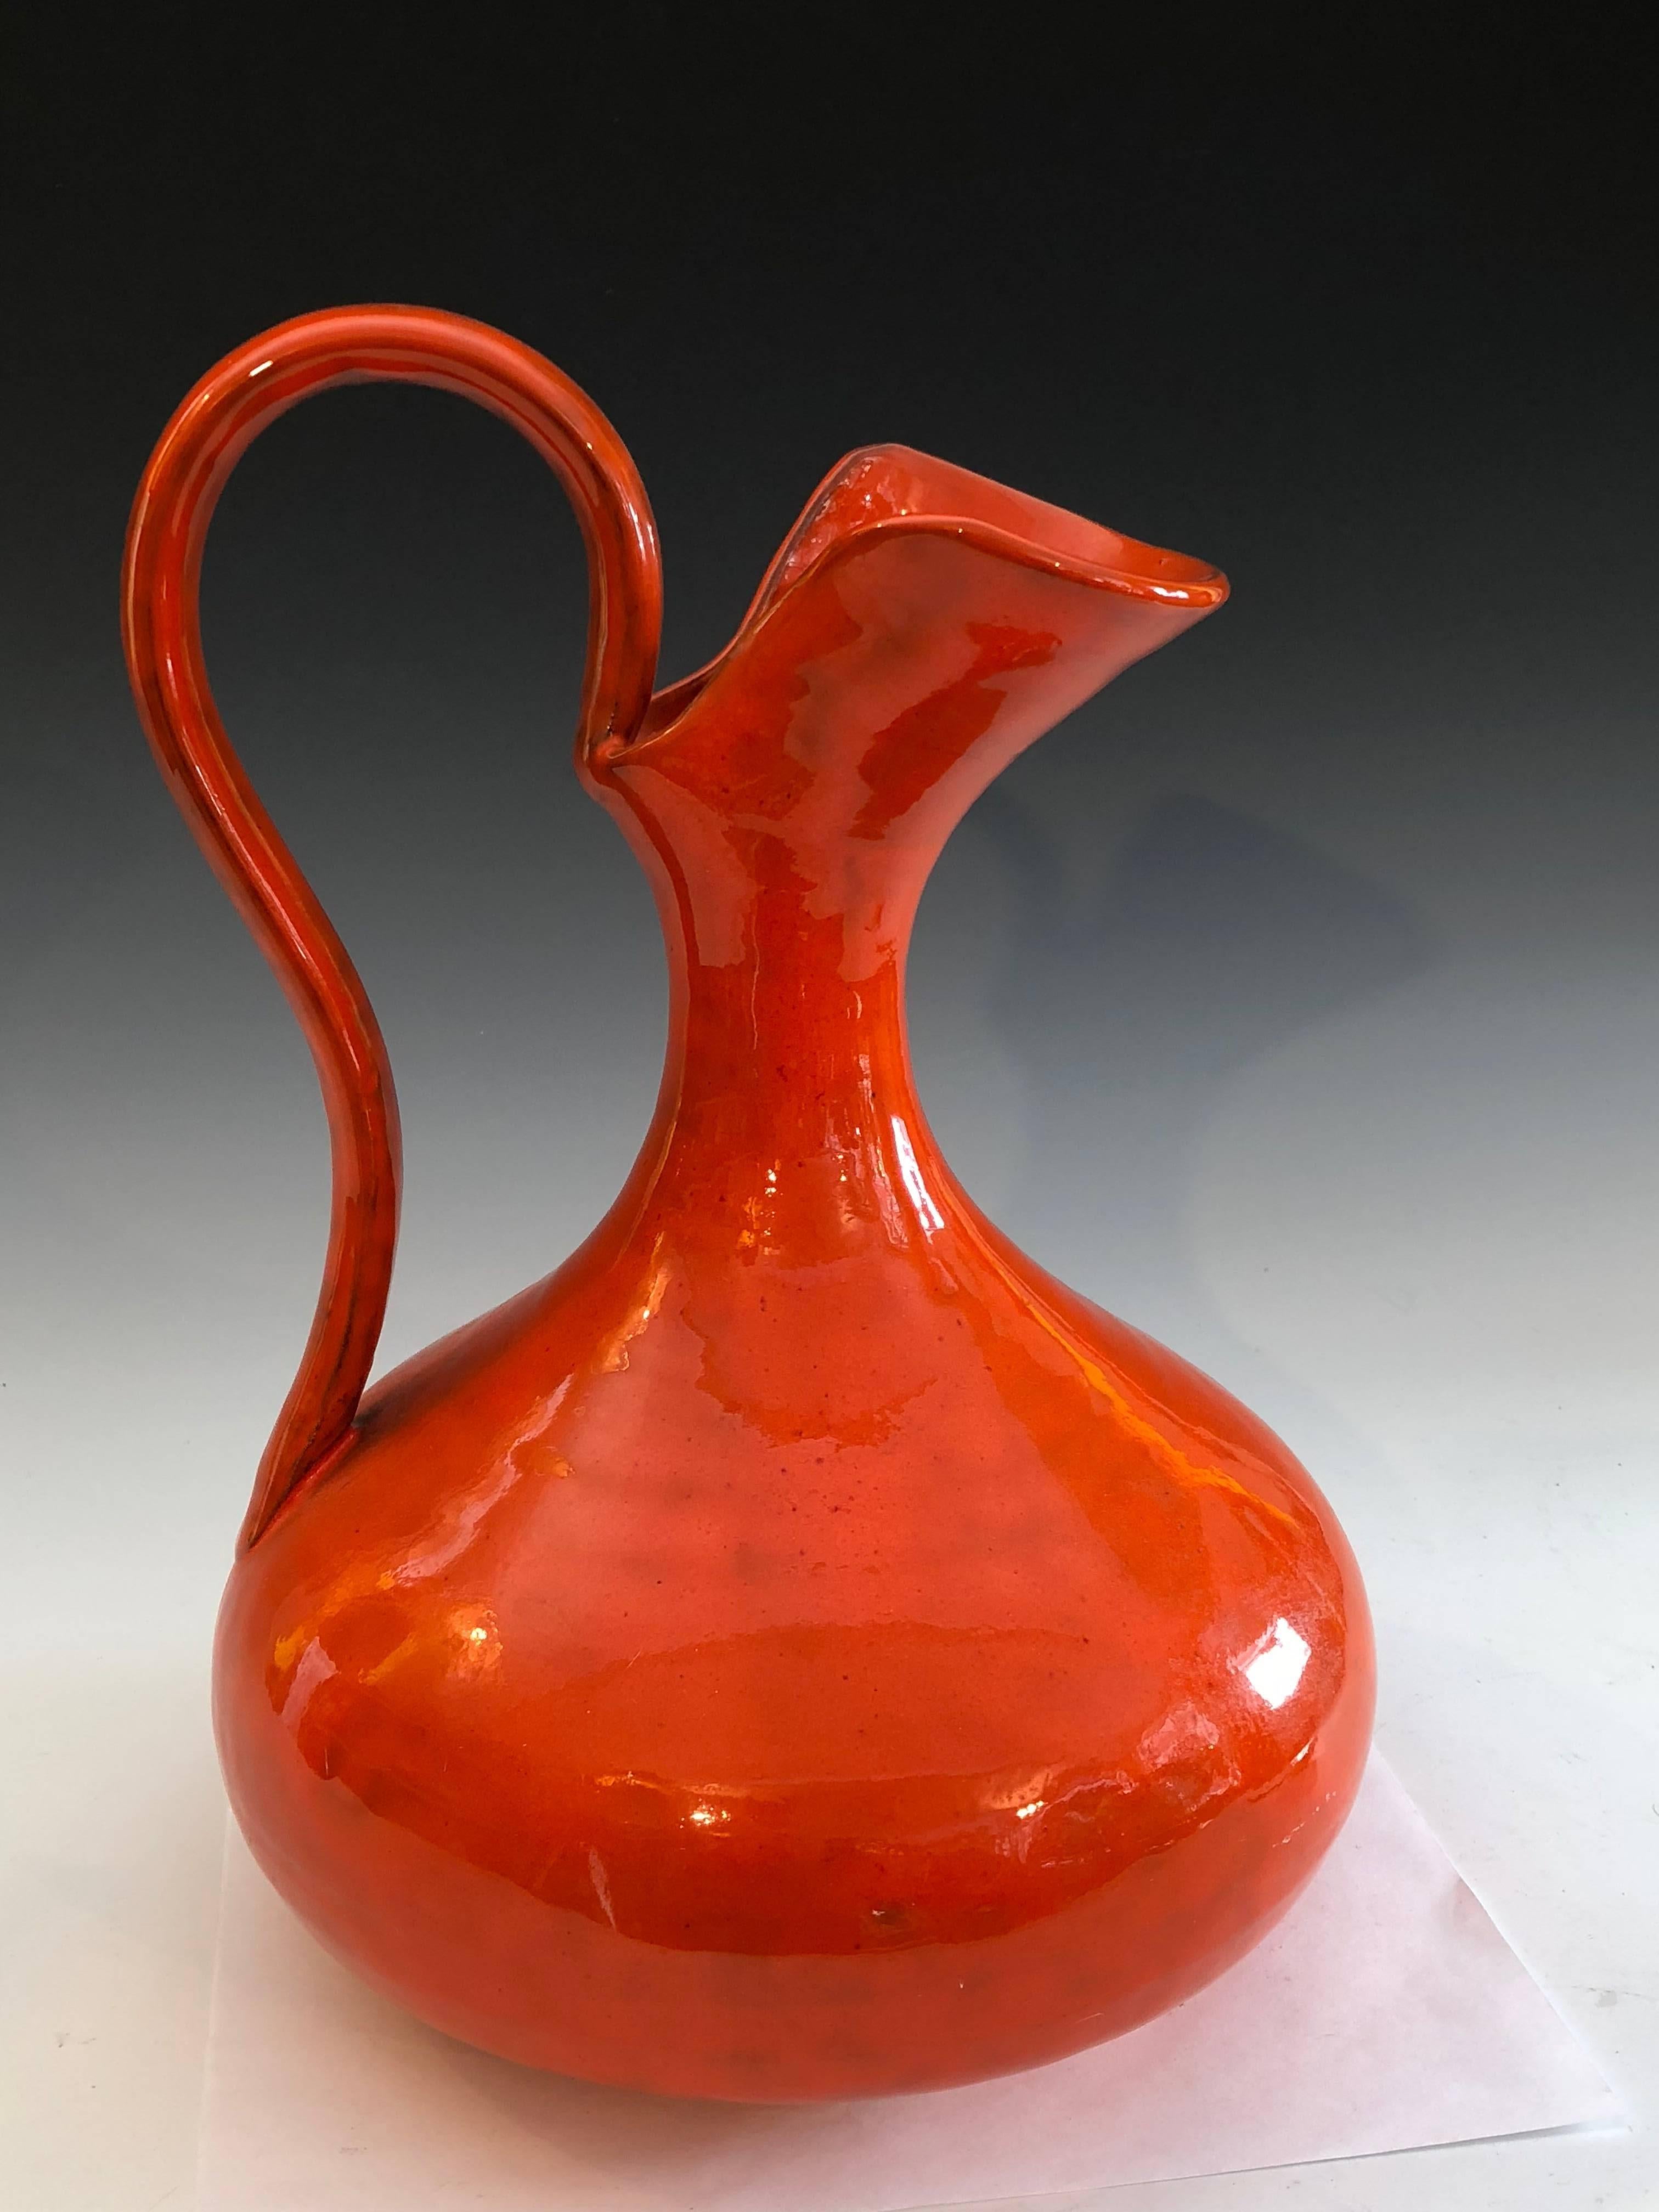 1960s hand-turned Italian pottery pitcher vase in classical form with electric mottled orange glaze. Attributed to Italica Ars. Measures: 13